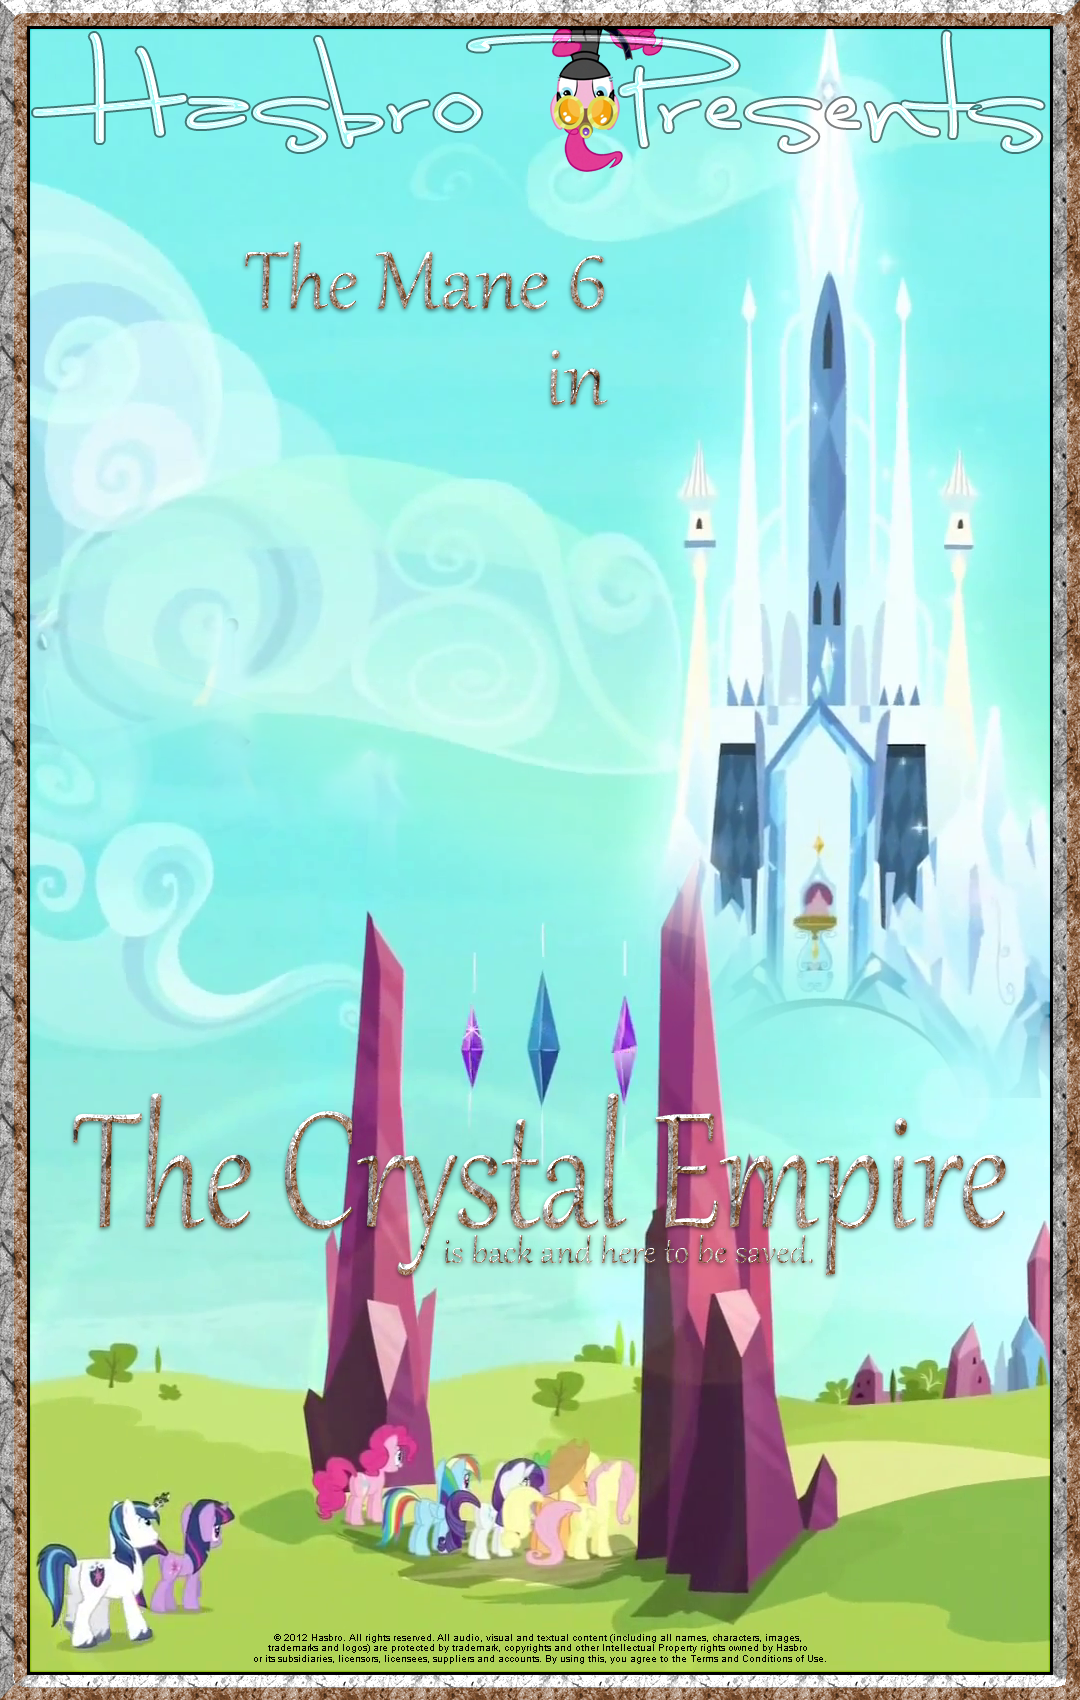 mlp___the_crystal_empire___movie_poster_by_pims1978-d5kwv55.png